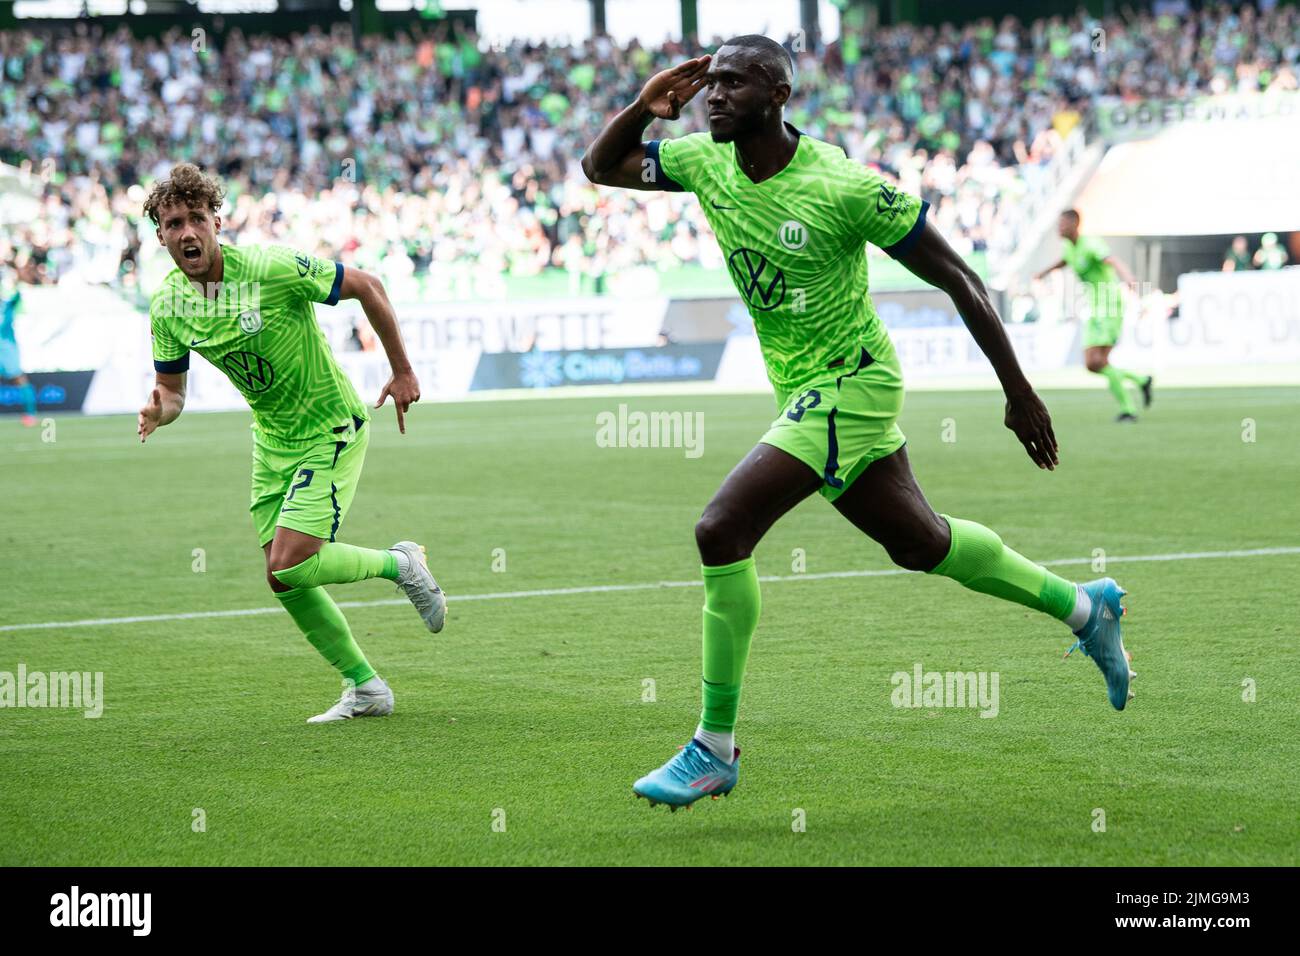 Wolfsburg, Germany. 06th Aug, 2022. Soccer, Bundesliga, VfL Wolfsburg - SV Werder Bremen, Matchday 1, Volkswagen Arena. Wolfsburg's Josuha Guilavogui (r) celebrates with Wolfsburg's Luca Waldschmidt after his goal to make it 2-2. Credit: Swen Pförtner/dpa - IMPORTANT NOTE: In accordance with the requirements of the DFL Deutsche Fußball Liga and the DFB Deutscher Fußball-Bund, it is prohibited to use or have used photographs taken in the stadium and/or of the match in the form of sequence pictures and/or video-like photo series./dpa/Alamy Live News Stock Photo